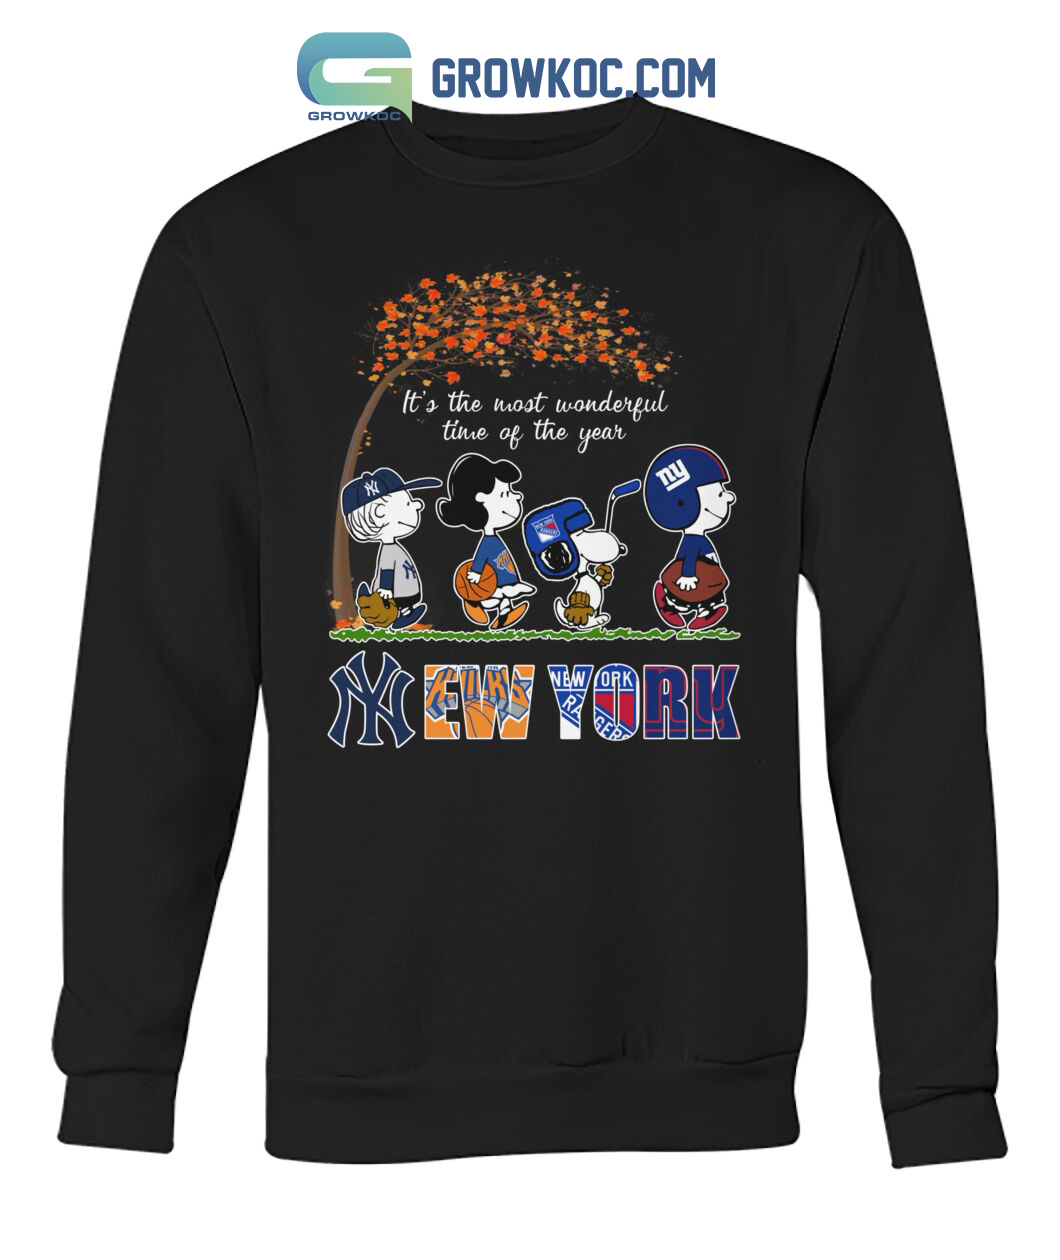 It's The Most Wonderful Time Of The Year New York Yankees Knicks Rangers And Giants T Shirt